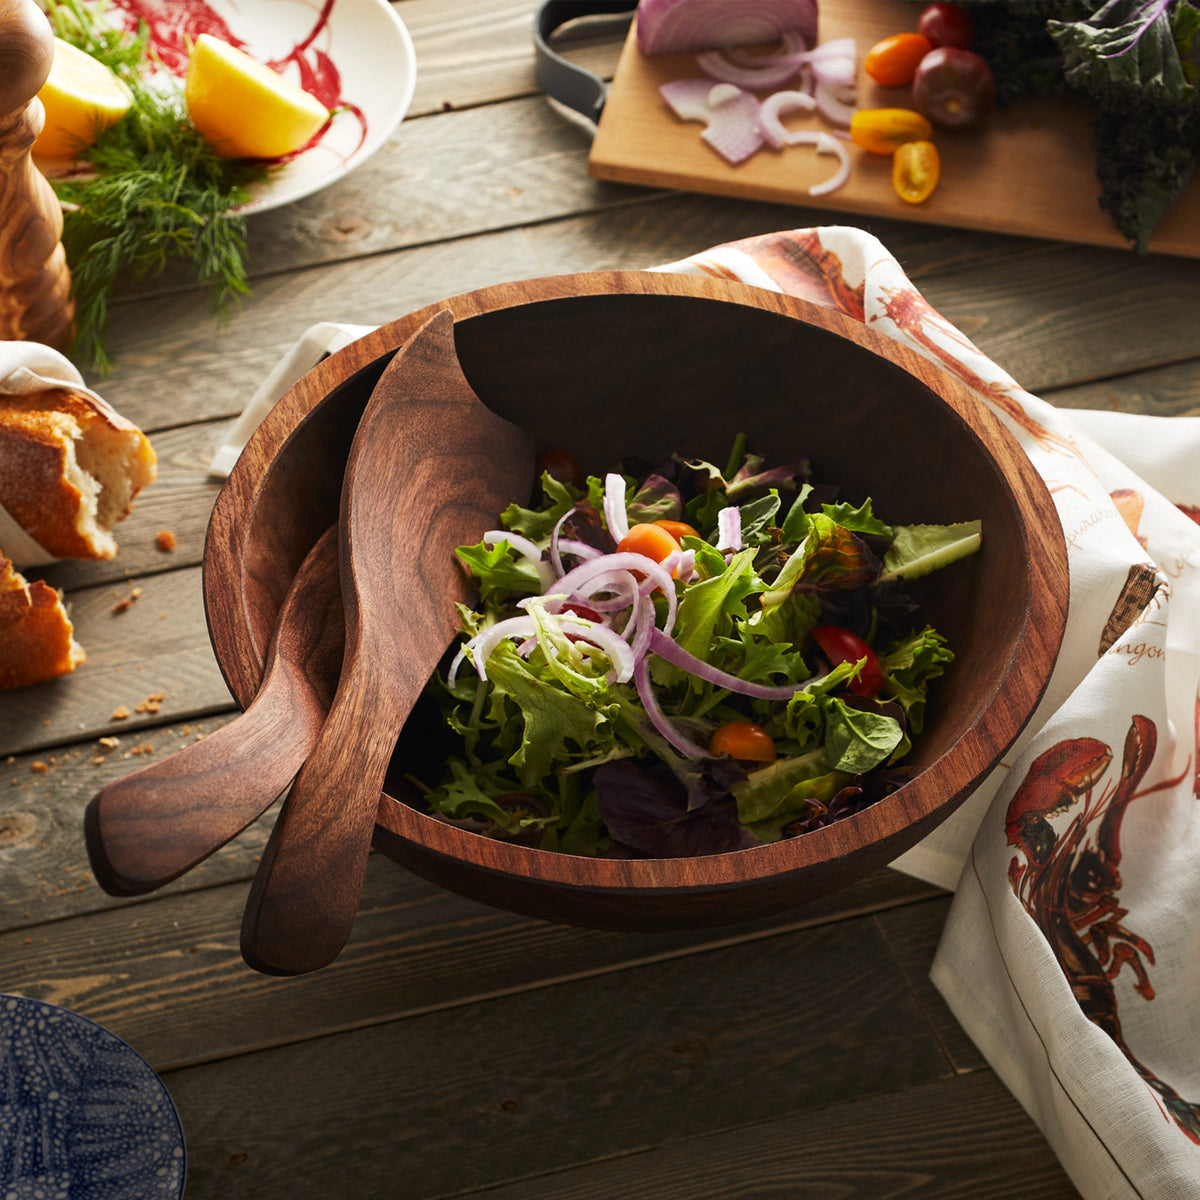 A Peterman&#39;s Black Walnut 13&quot; Handcrafted Serving Bowl with a salad in it crafted by an artisan woodworker.